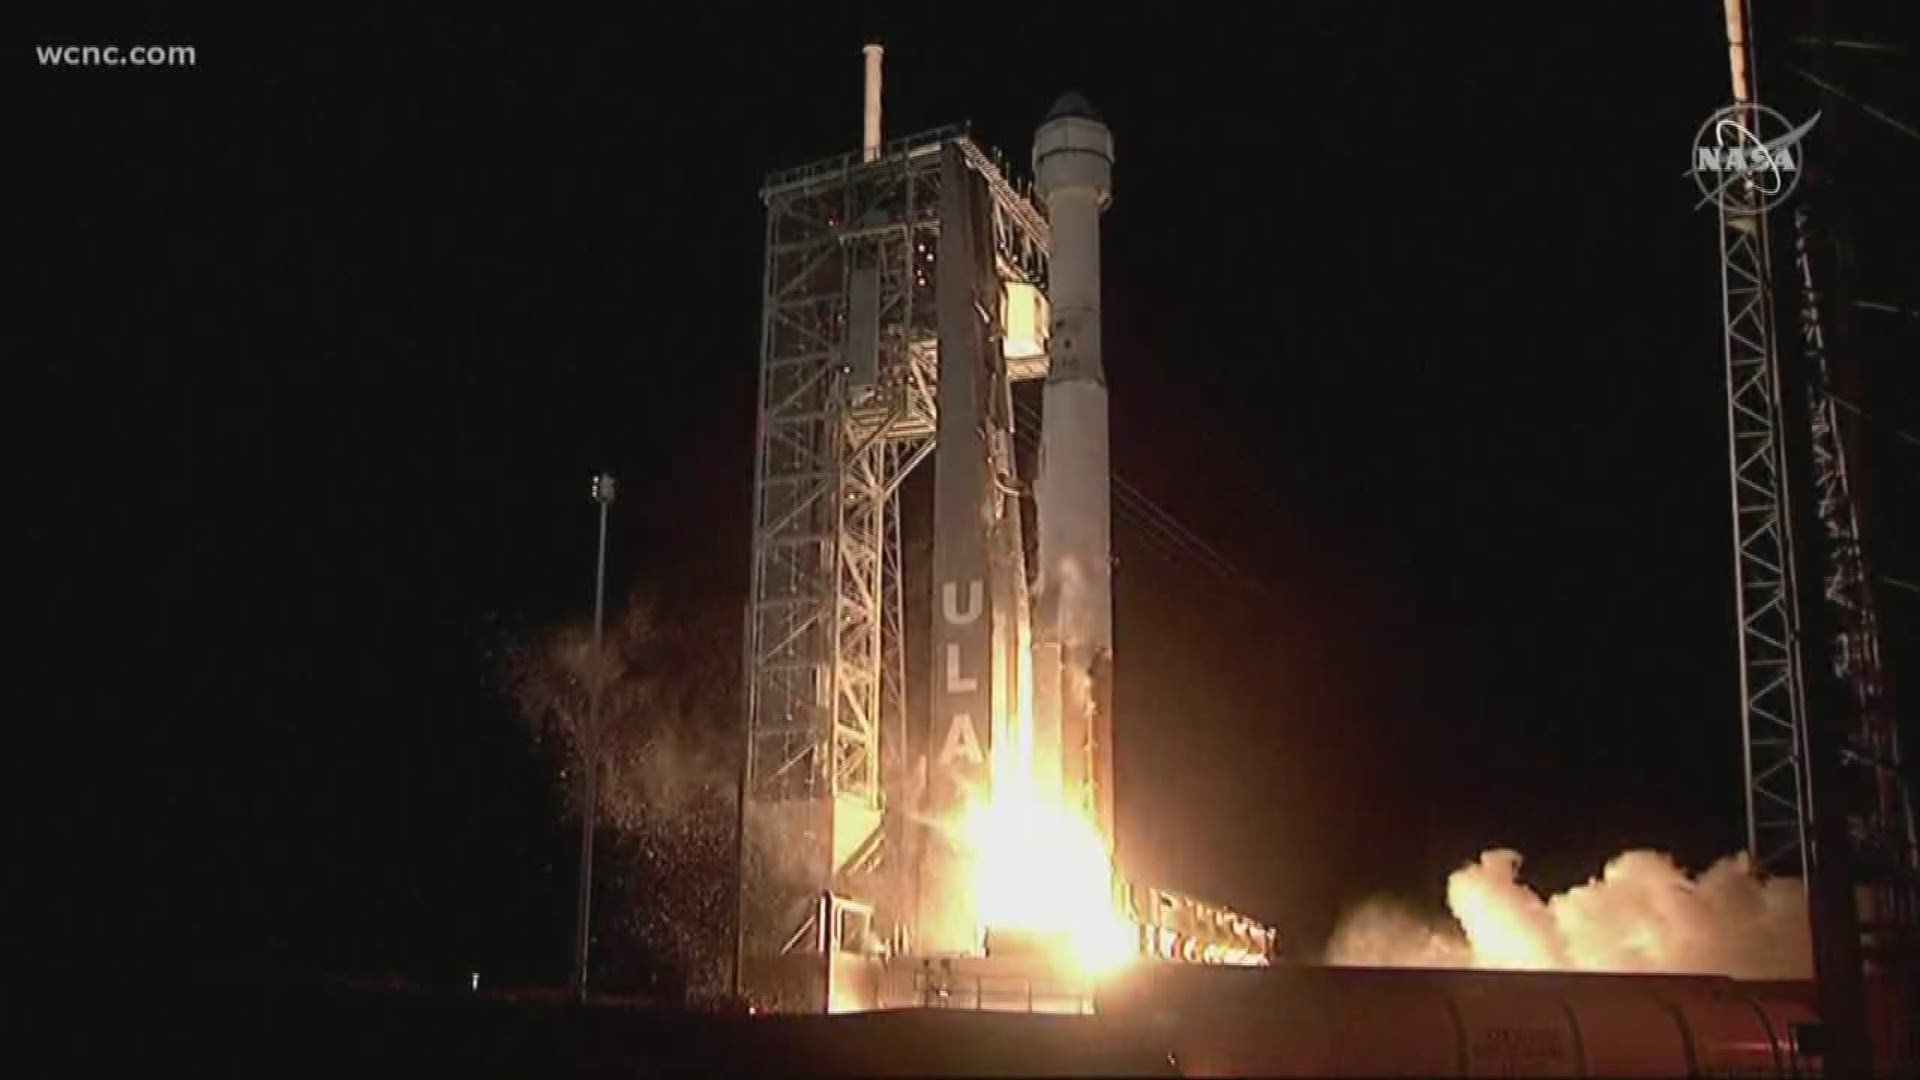 Everything went flawlessly as the Atlas V rocket lifted off with the Starliner capsule. But 30 minutes into the flight, Boeing reported an issue.